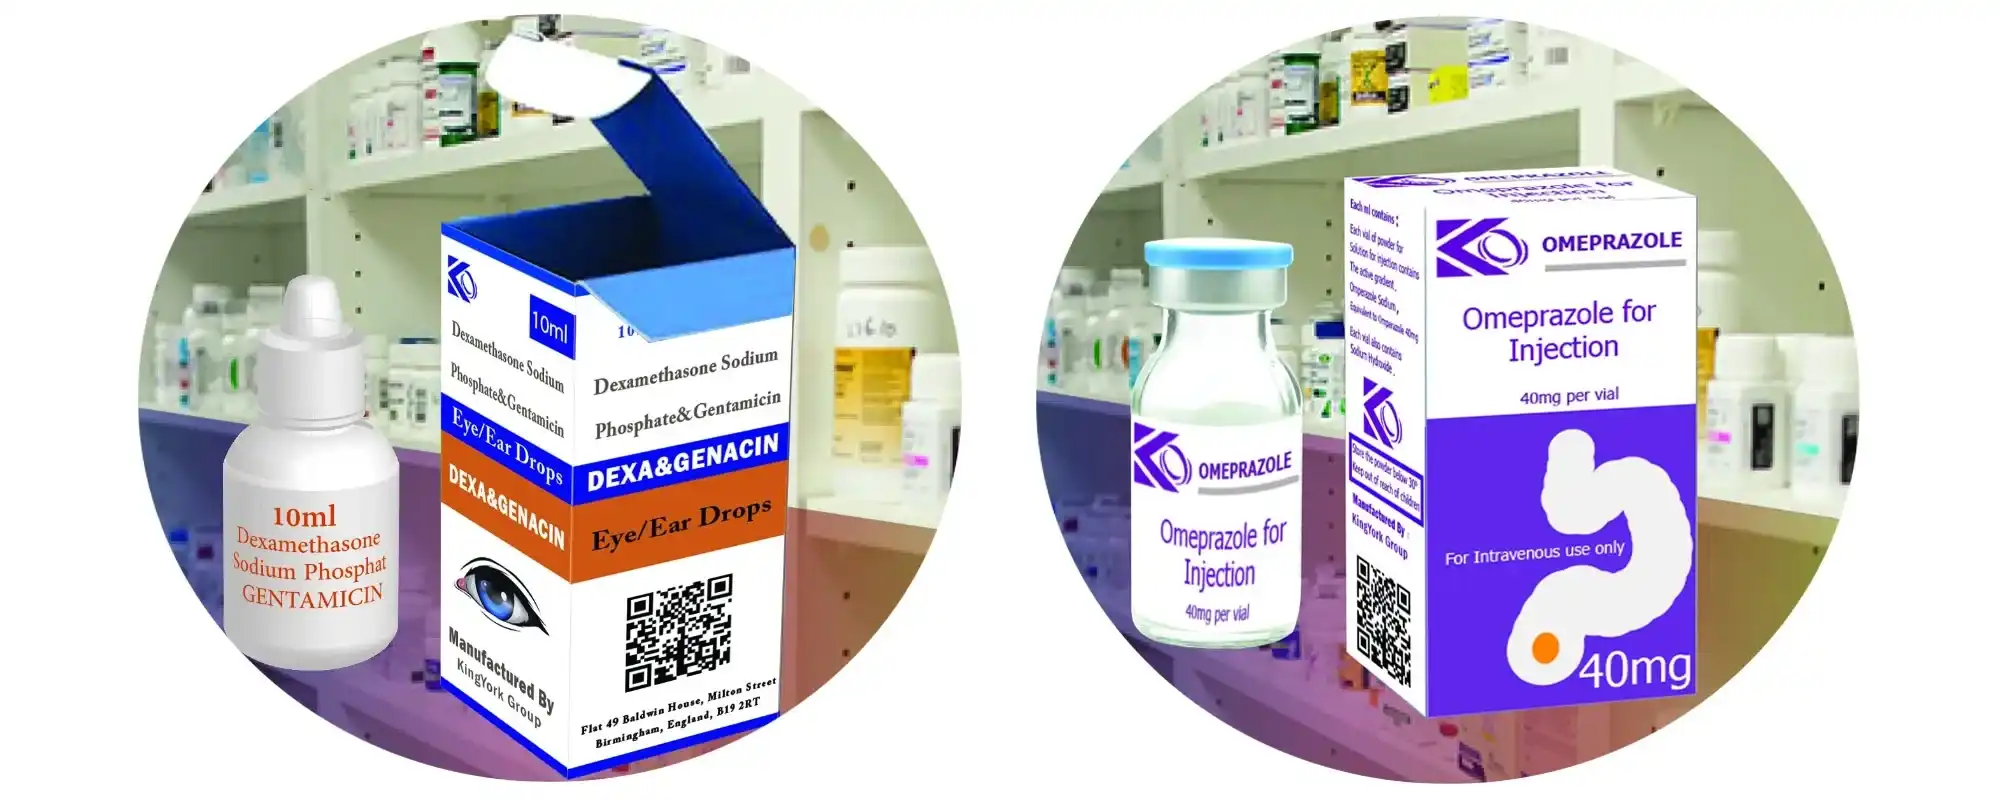 'Ceftriaxone vials', 'Ceftriaxone 1gm', 'Ceftriaxone 1gm injection'